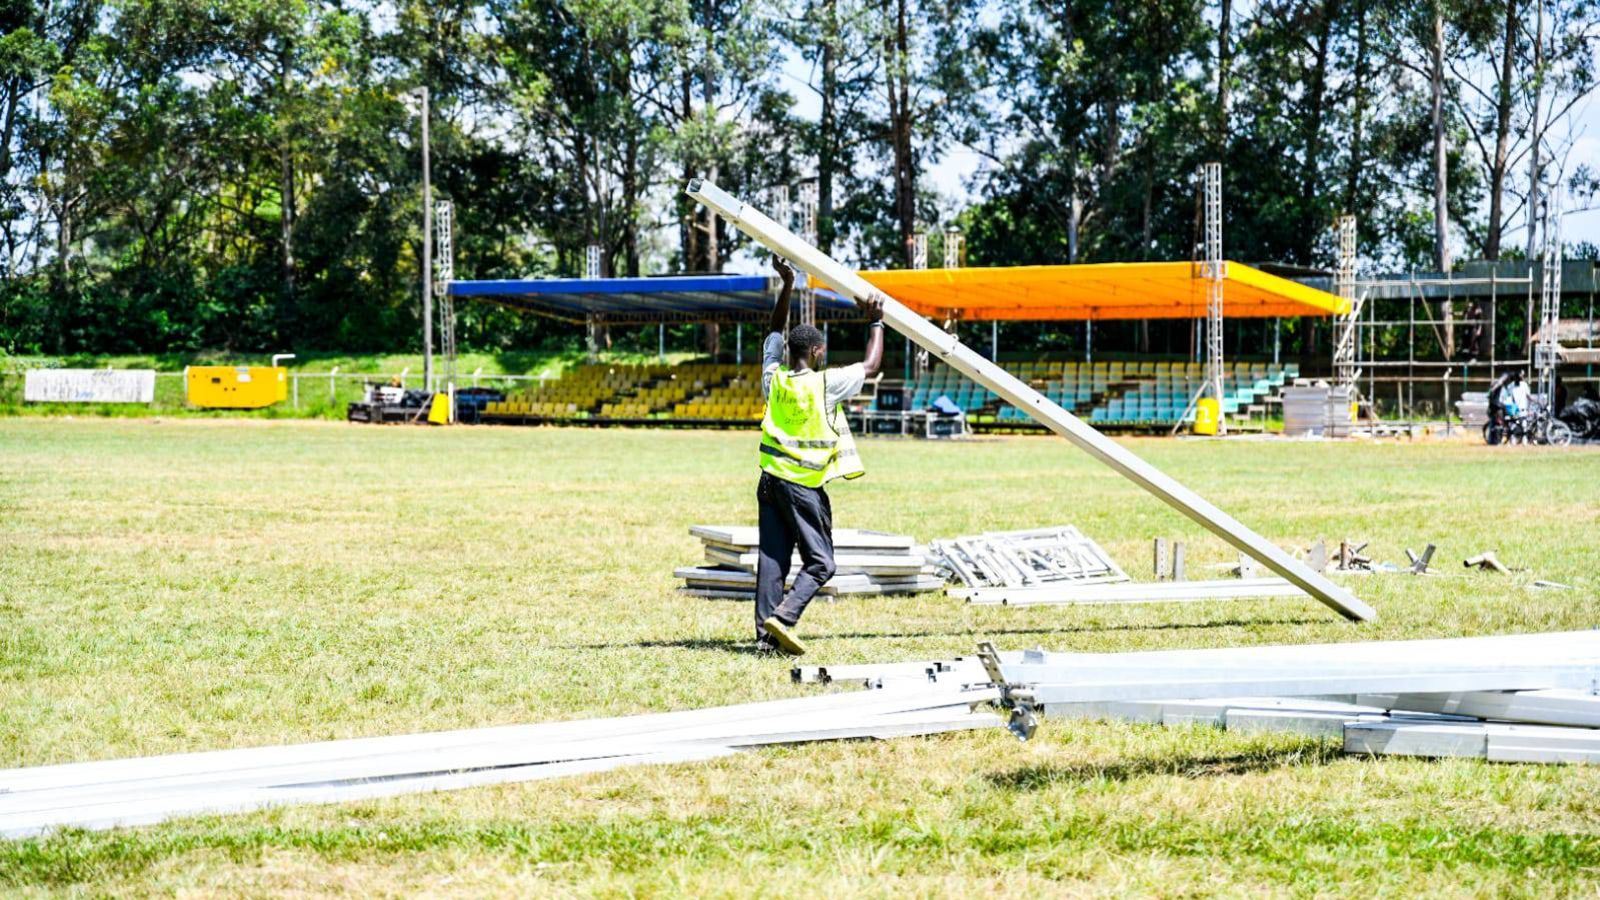 Bigger and better: All set for Sh3 million Cleo Malala Super Cup